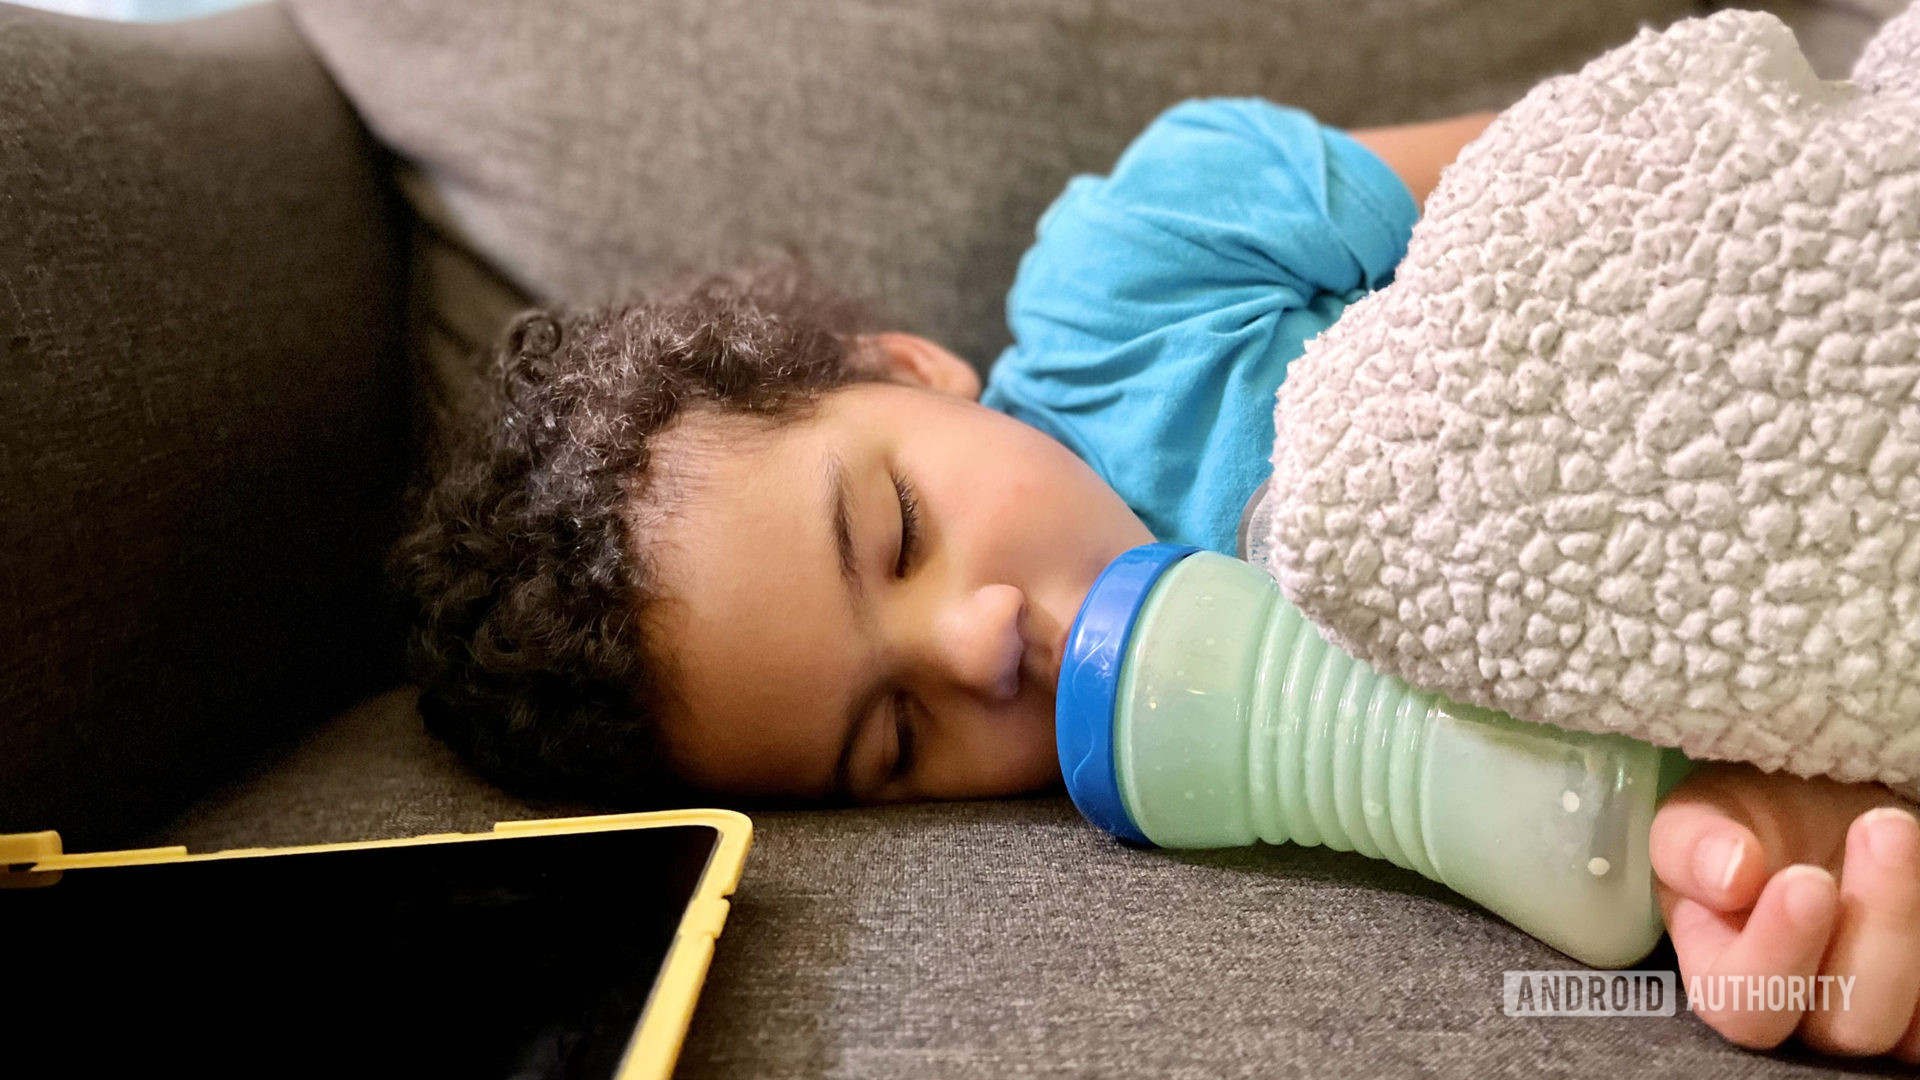 A toddler with a bottle and a blanket sleeping next to an iPad Air 2